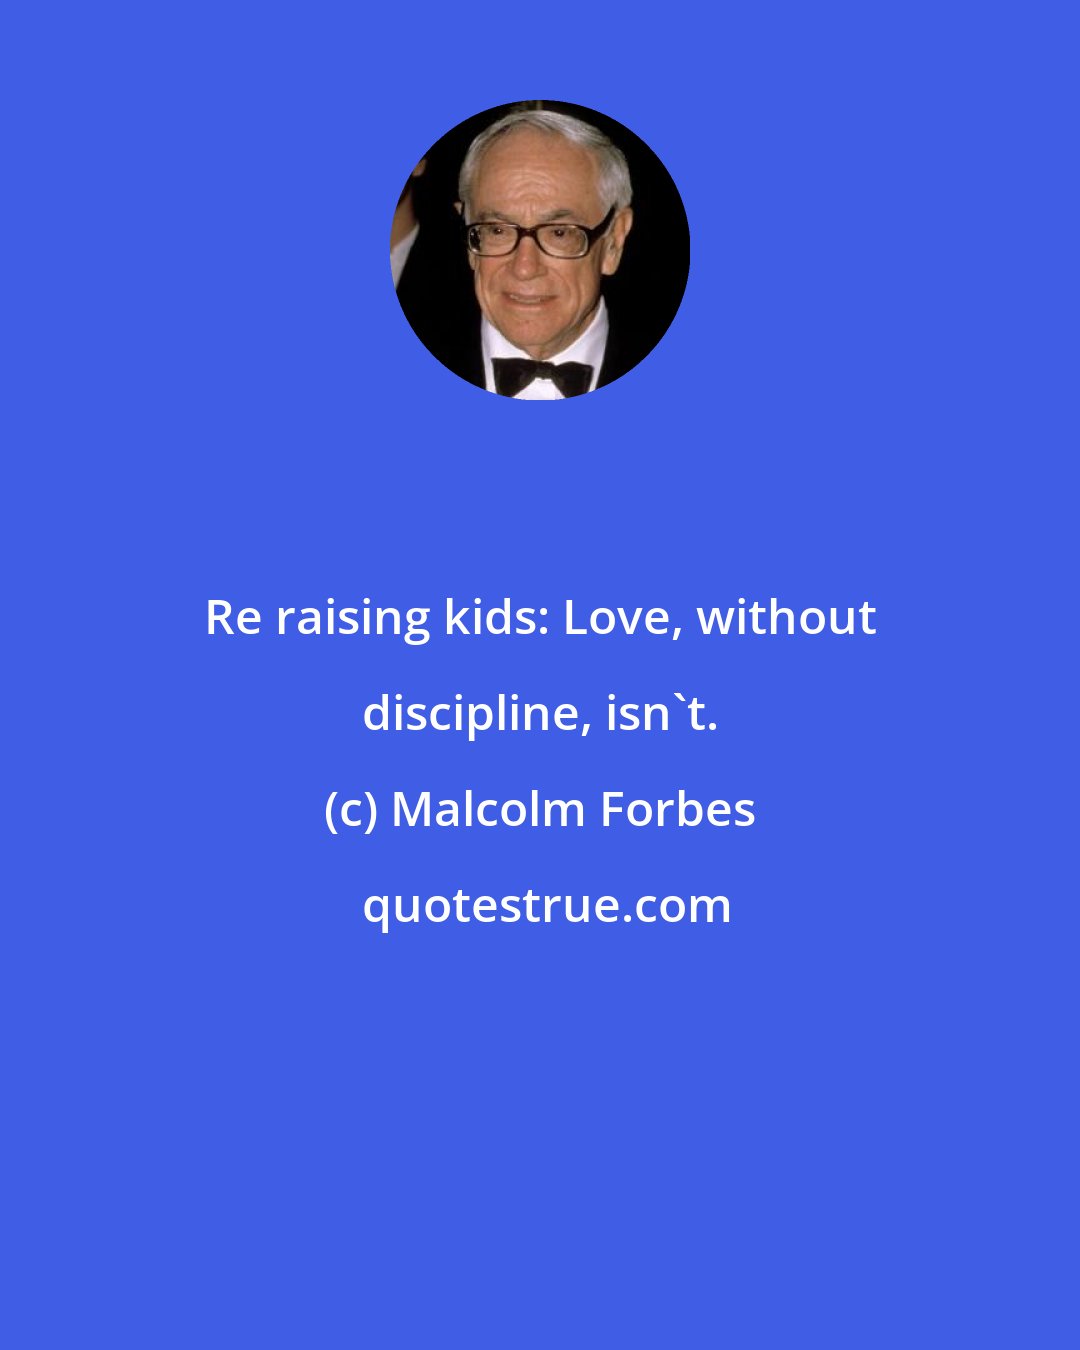 Malcolm Forbes: Re raising kids: Love, without discipline, isn't.